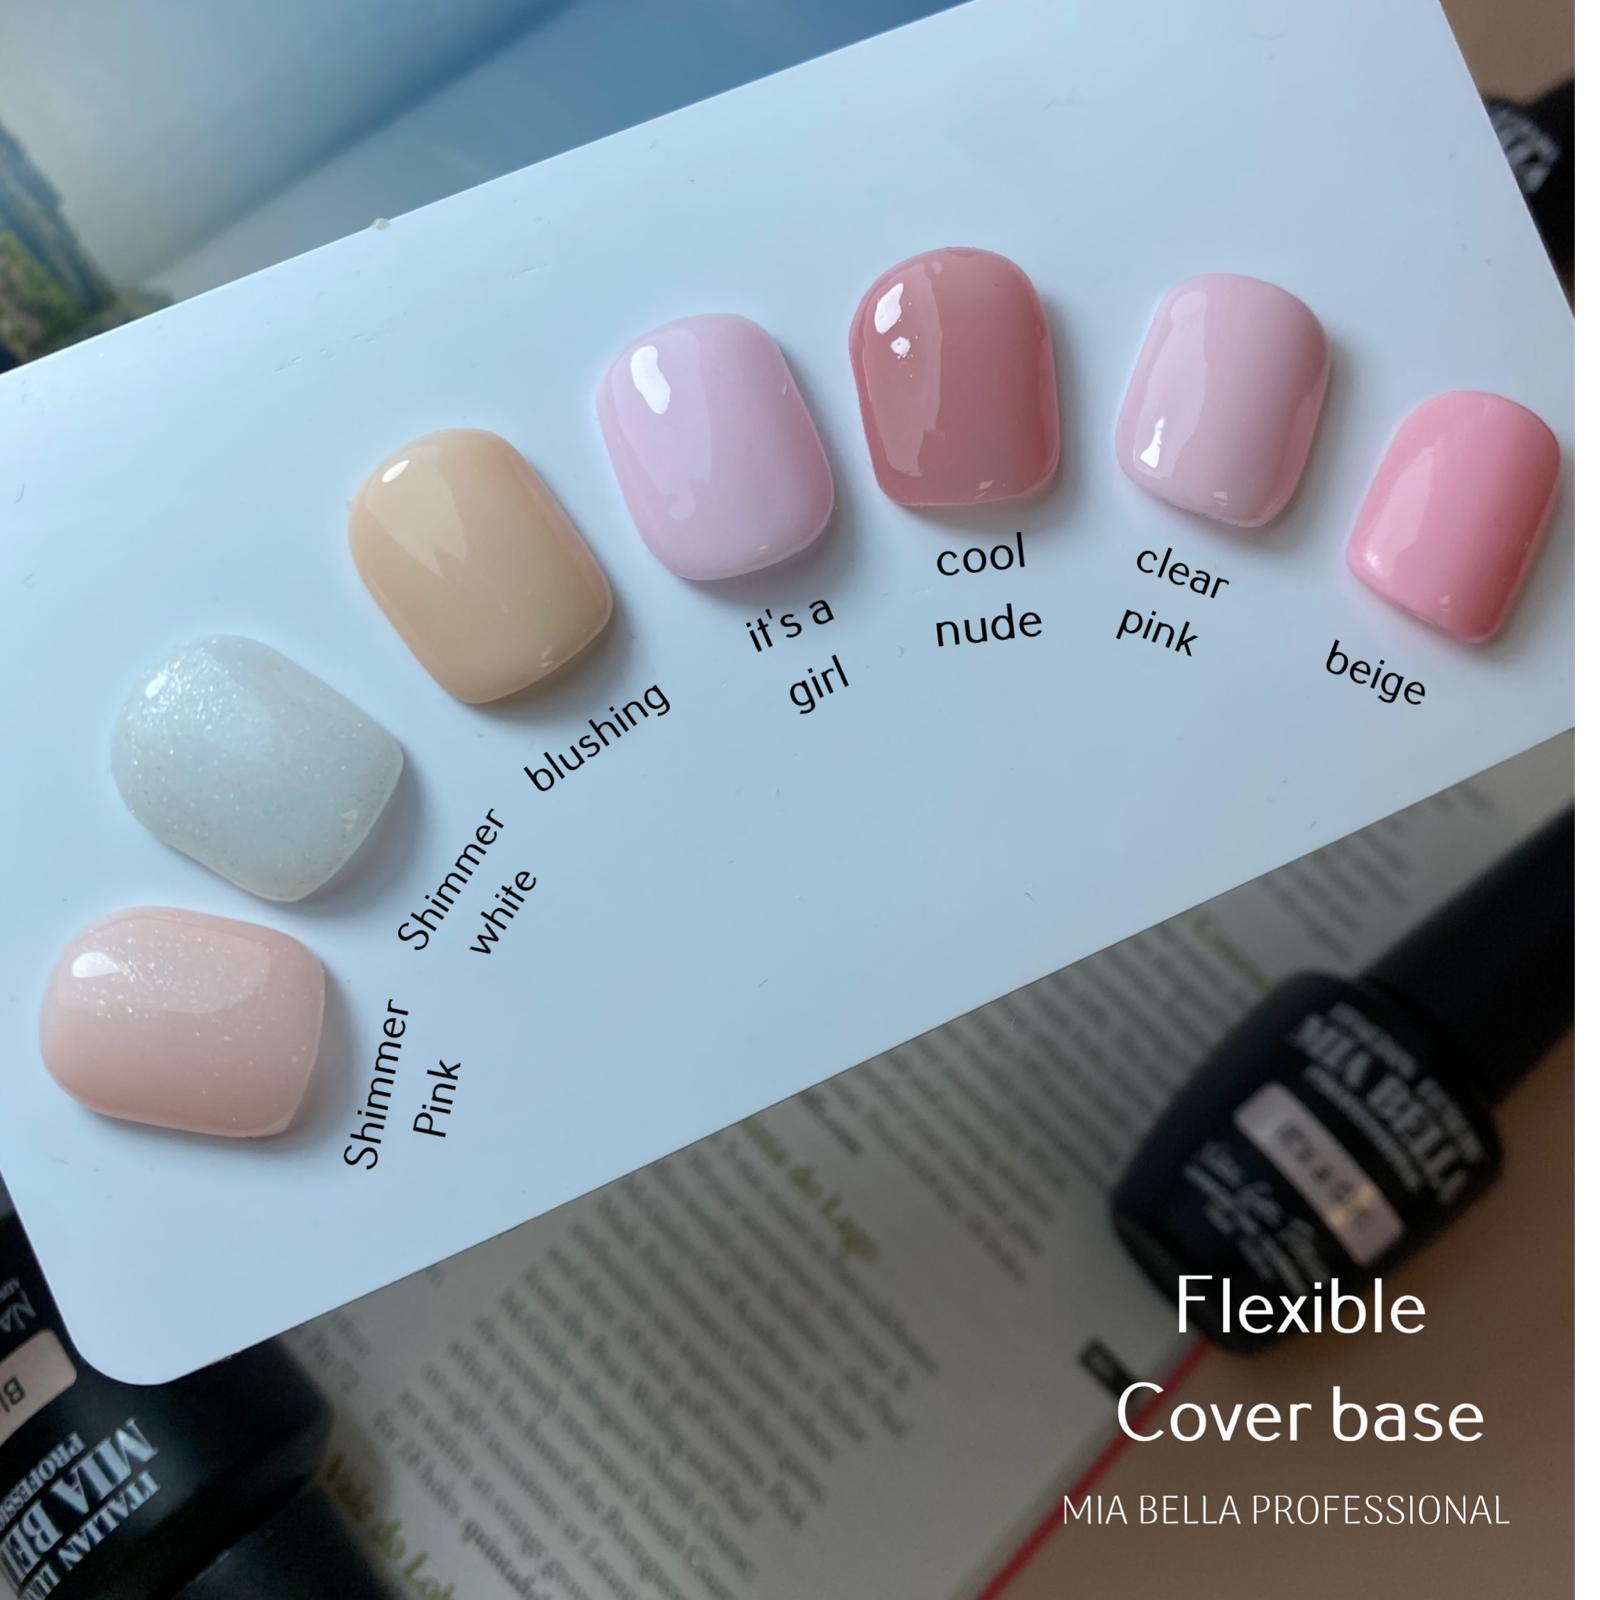 Flexible cover base- cool nude